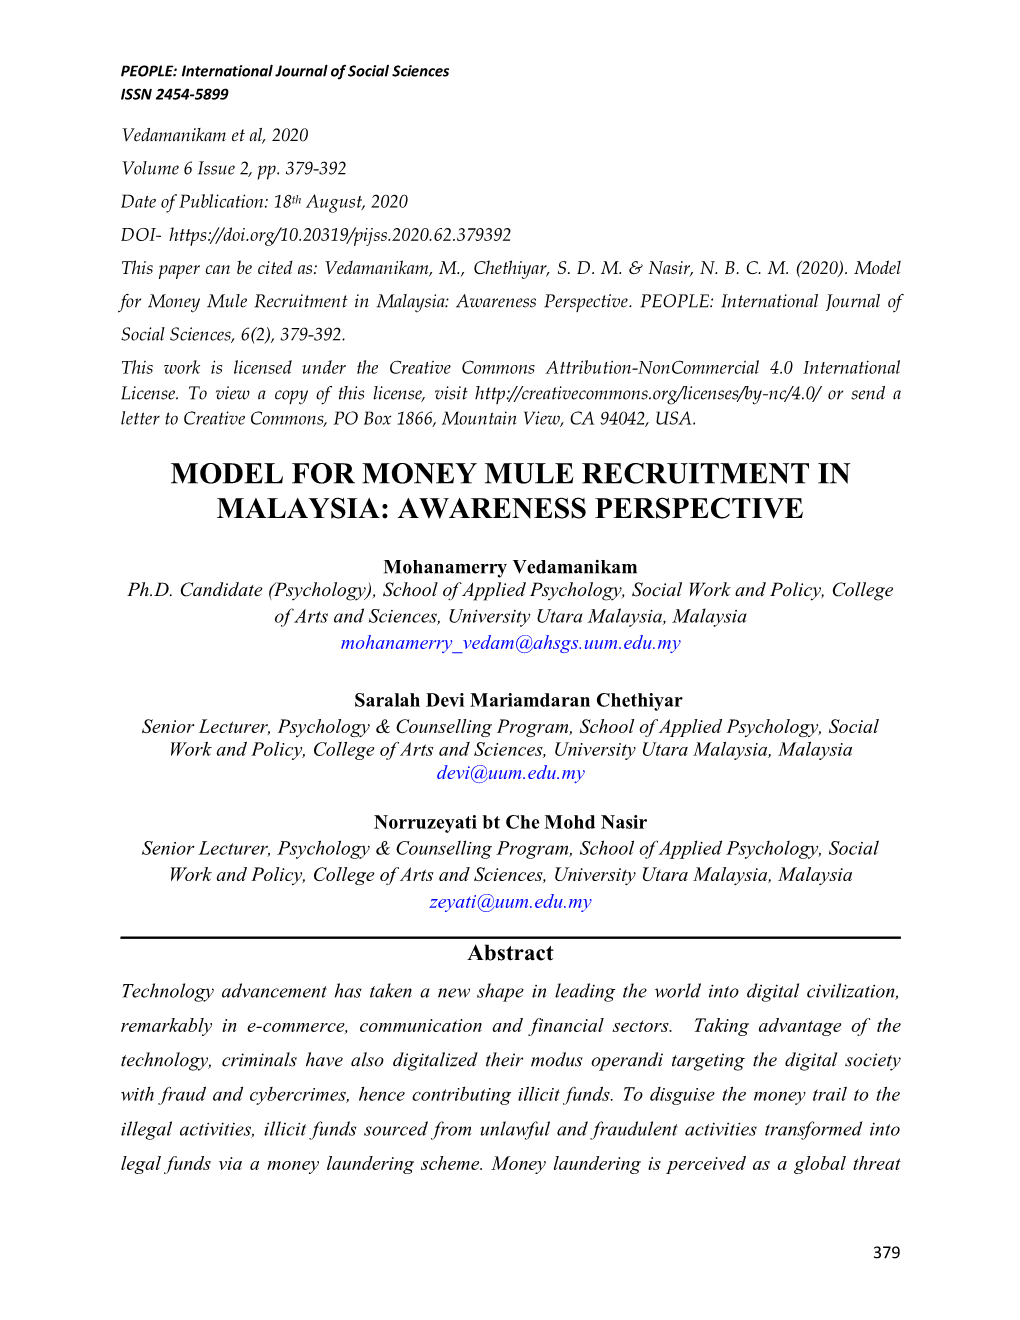 Model for Money Mule Recruitment in Malaysia: Awareness Perspective